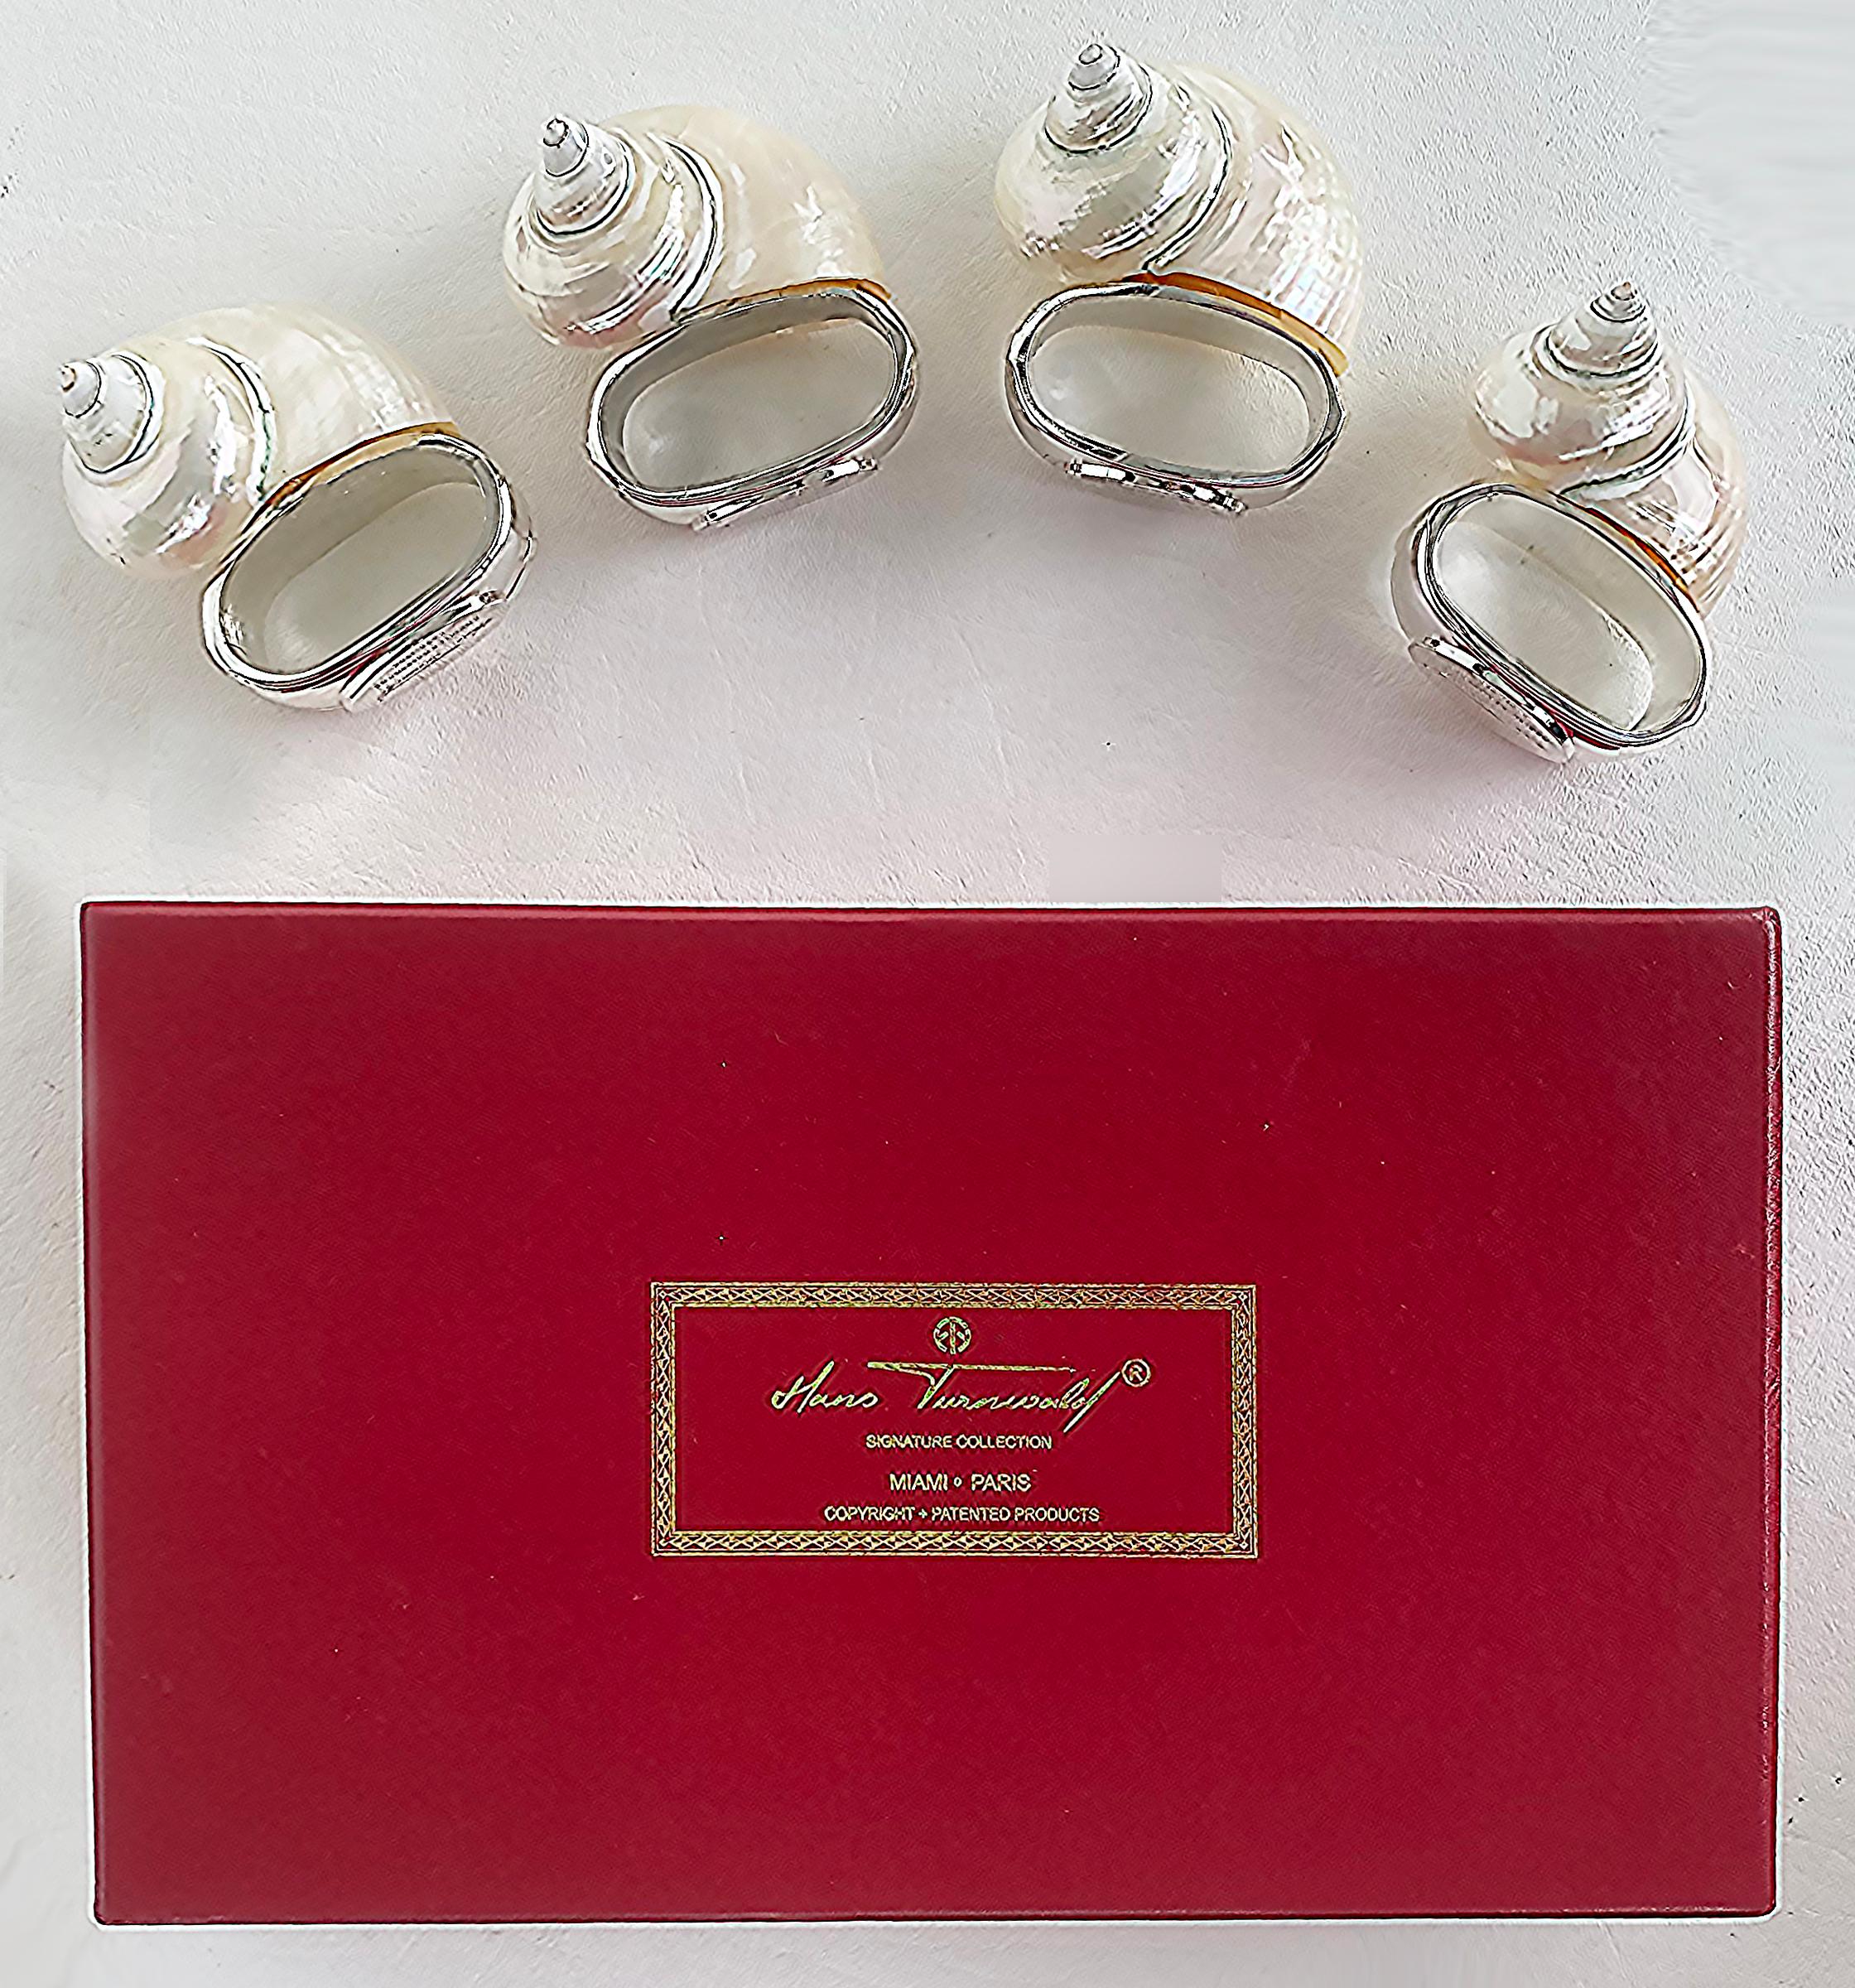 Silver Plate 4 Hans Turnwald Sea Shell Silverplate Napkin Rings with Original Box